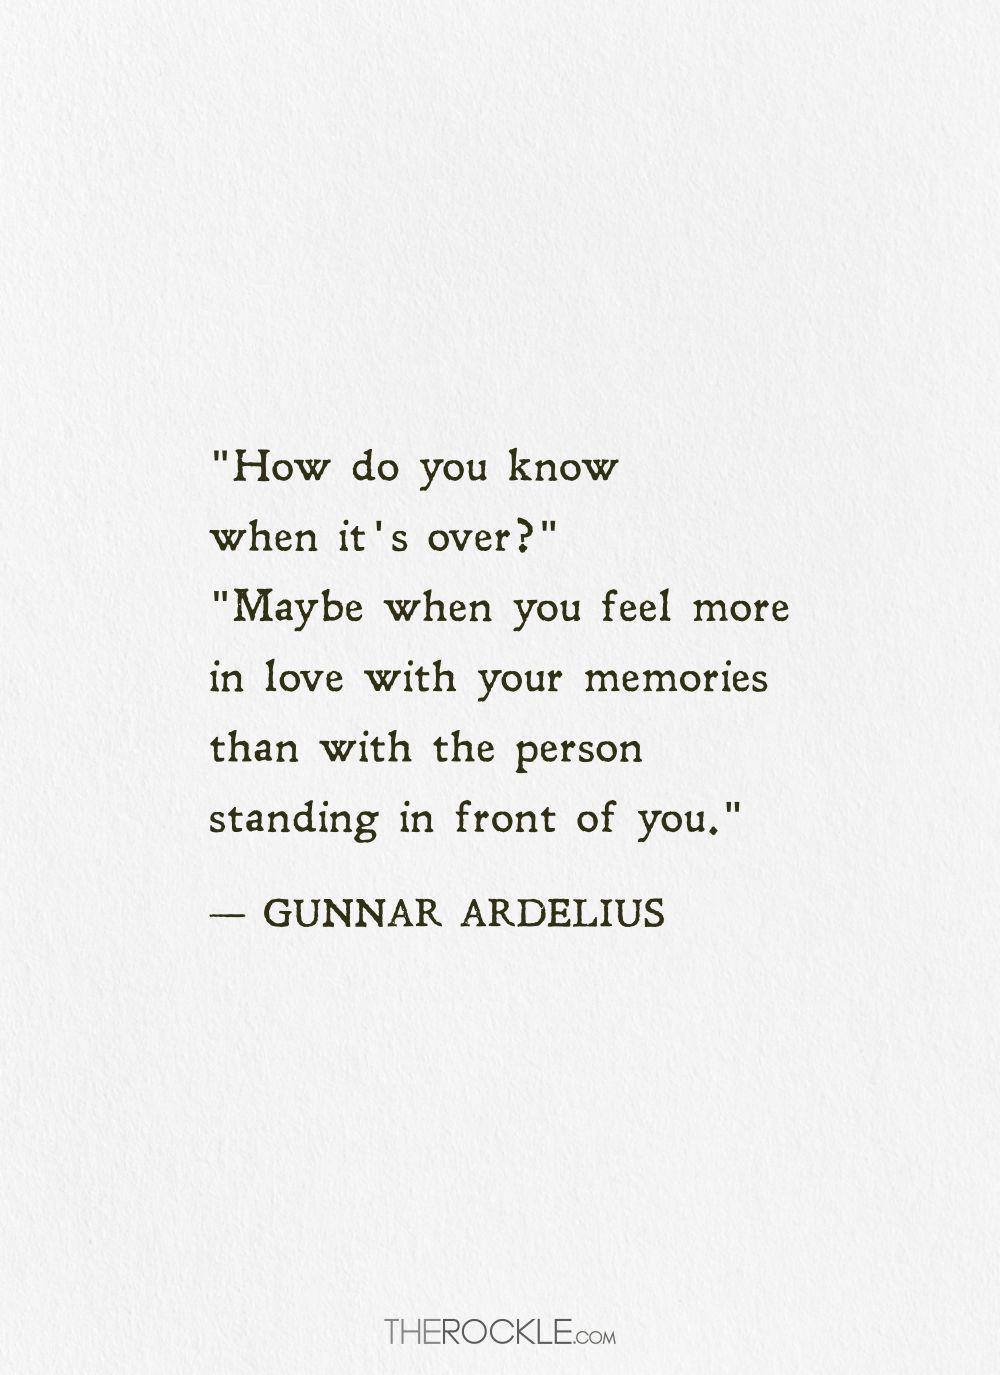 Sad Love Quotes To Help You Cope With Heartbreak - The Rockle